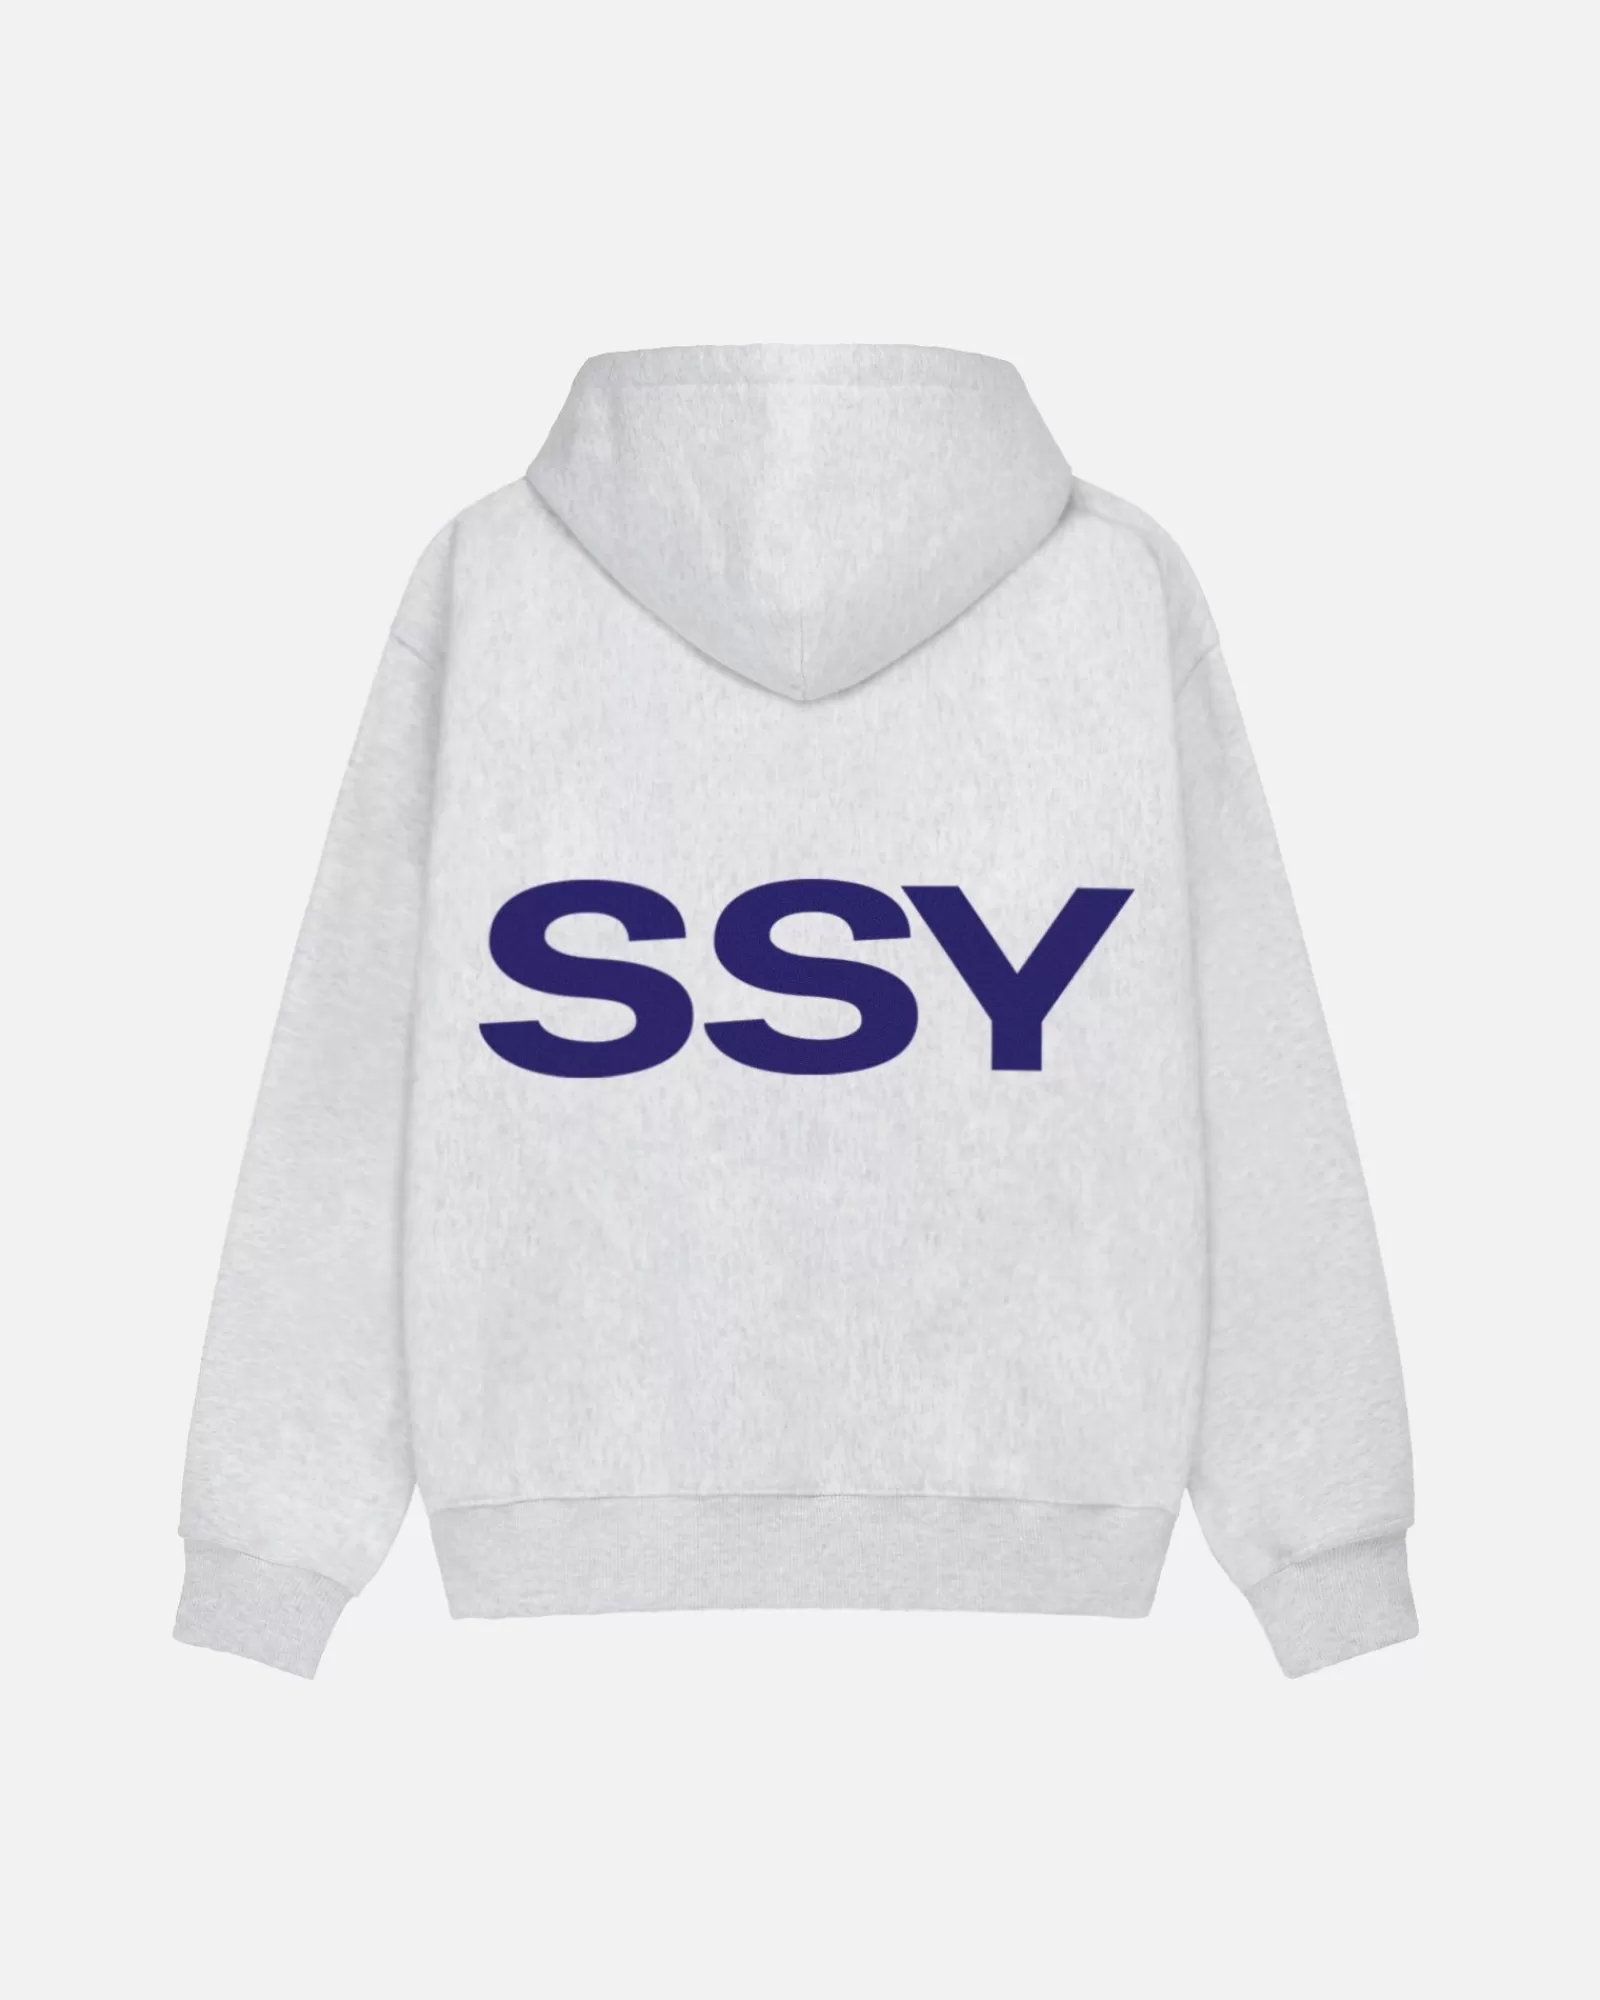 Stüssy All Caps Hoodie Outlet